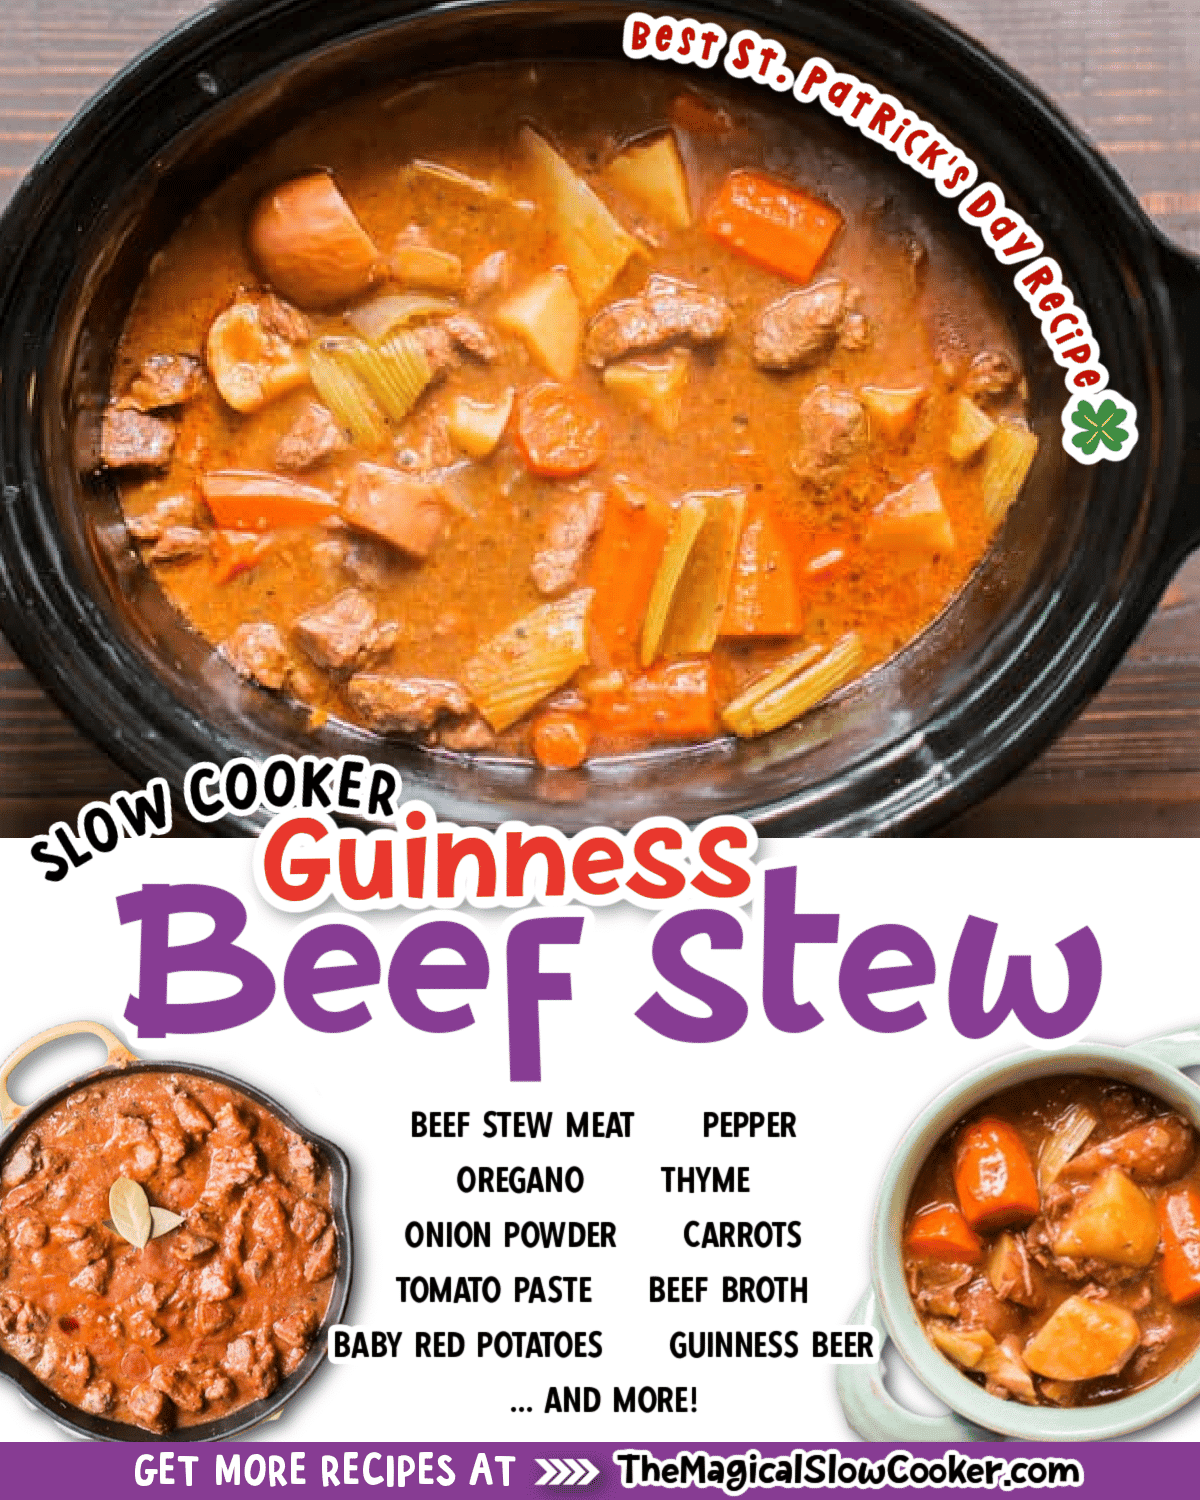 Collage of Guinness beef stew images with text of what ingredients are.